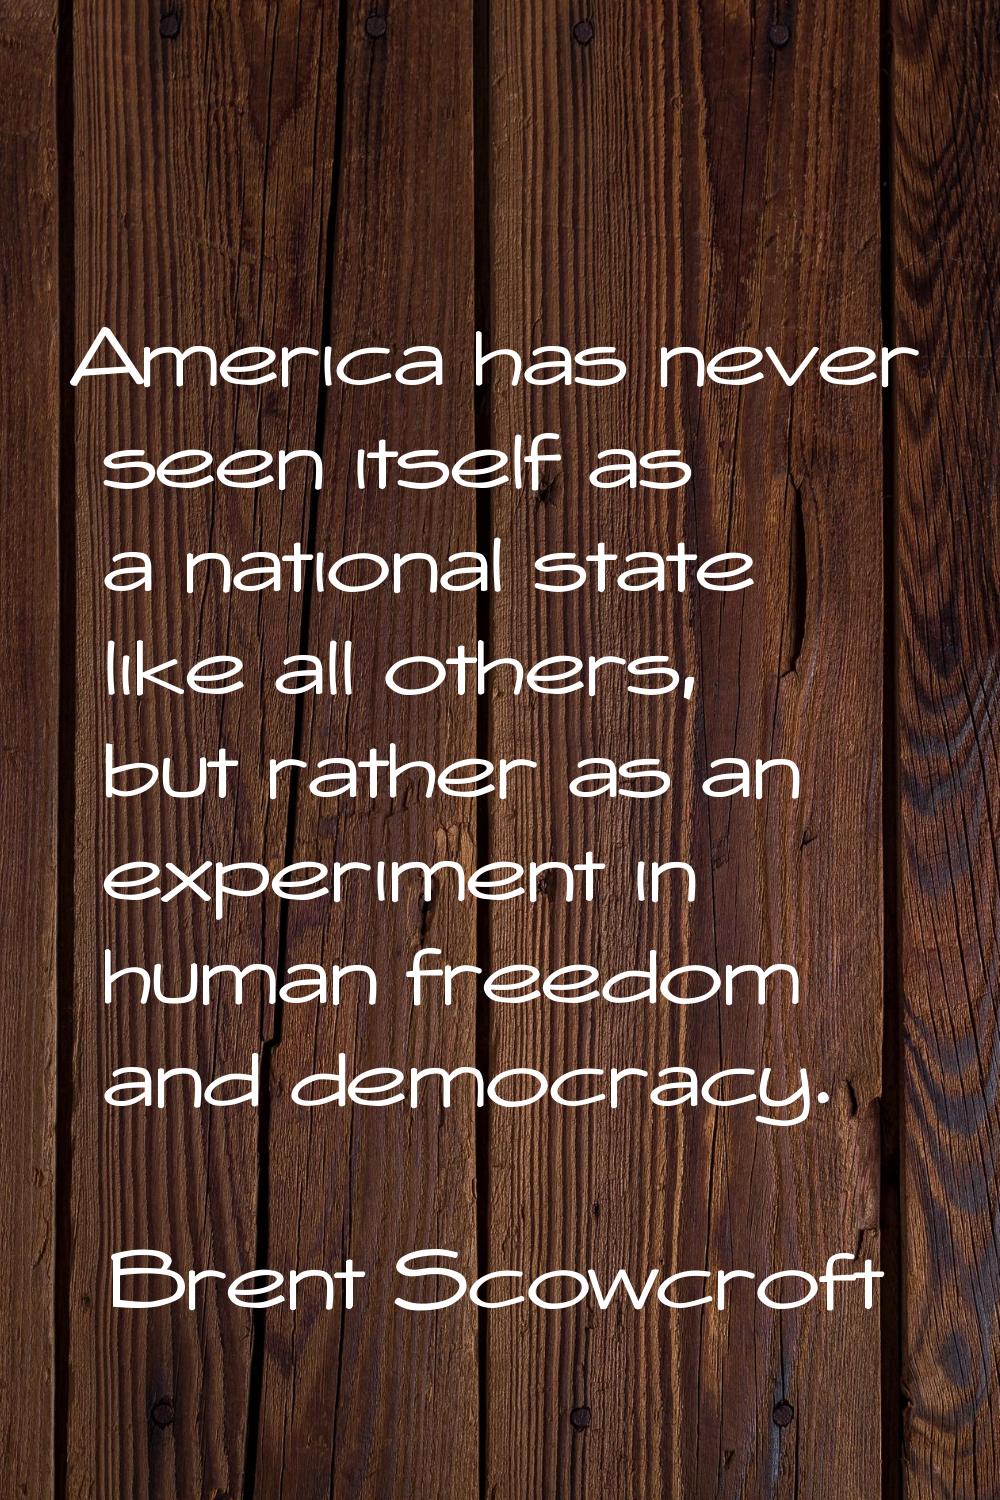 America has never seen itself as a national state like all others, but rather as an experiment in h